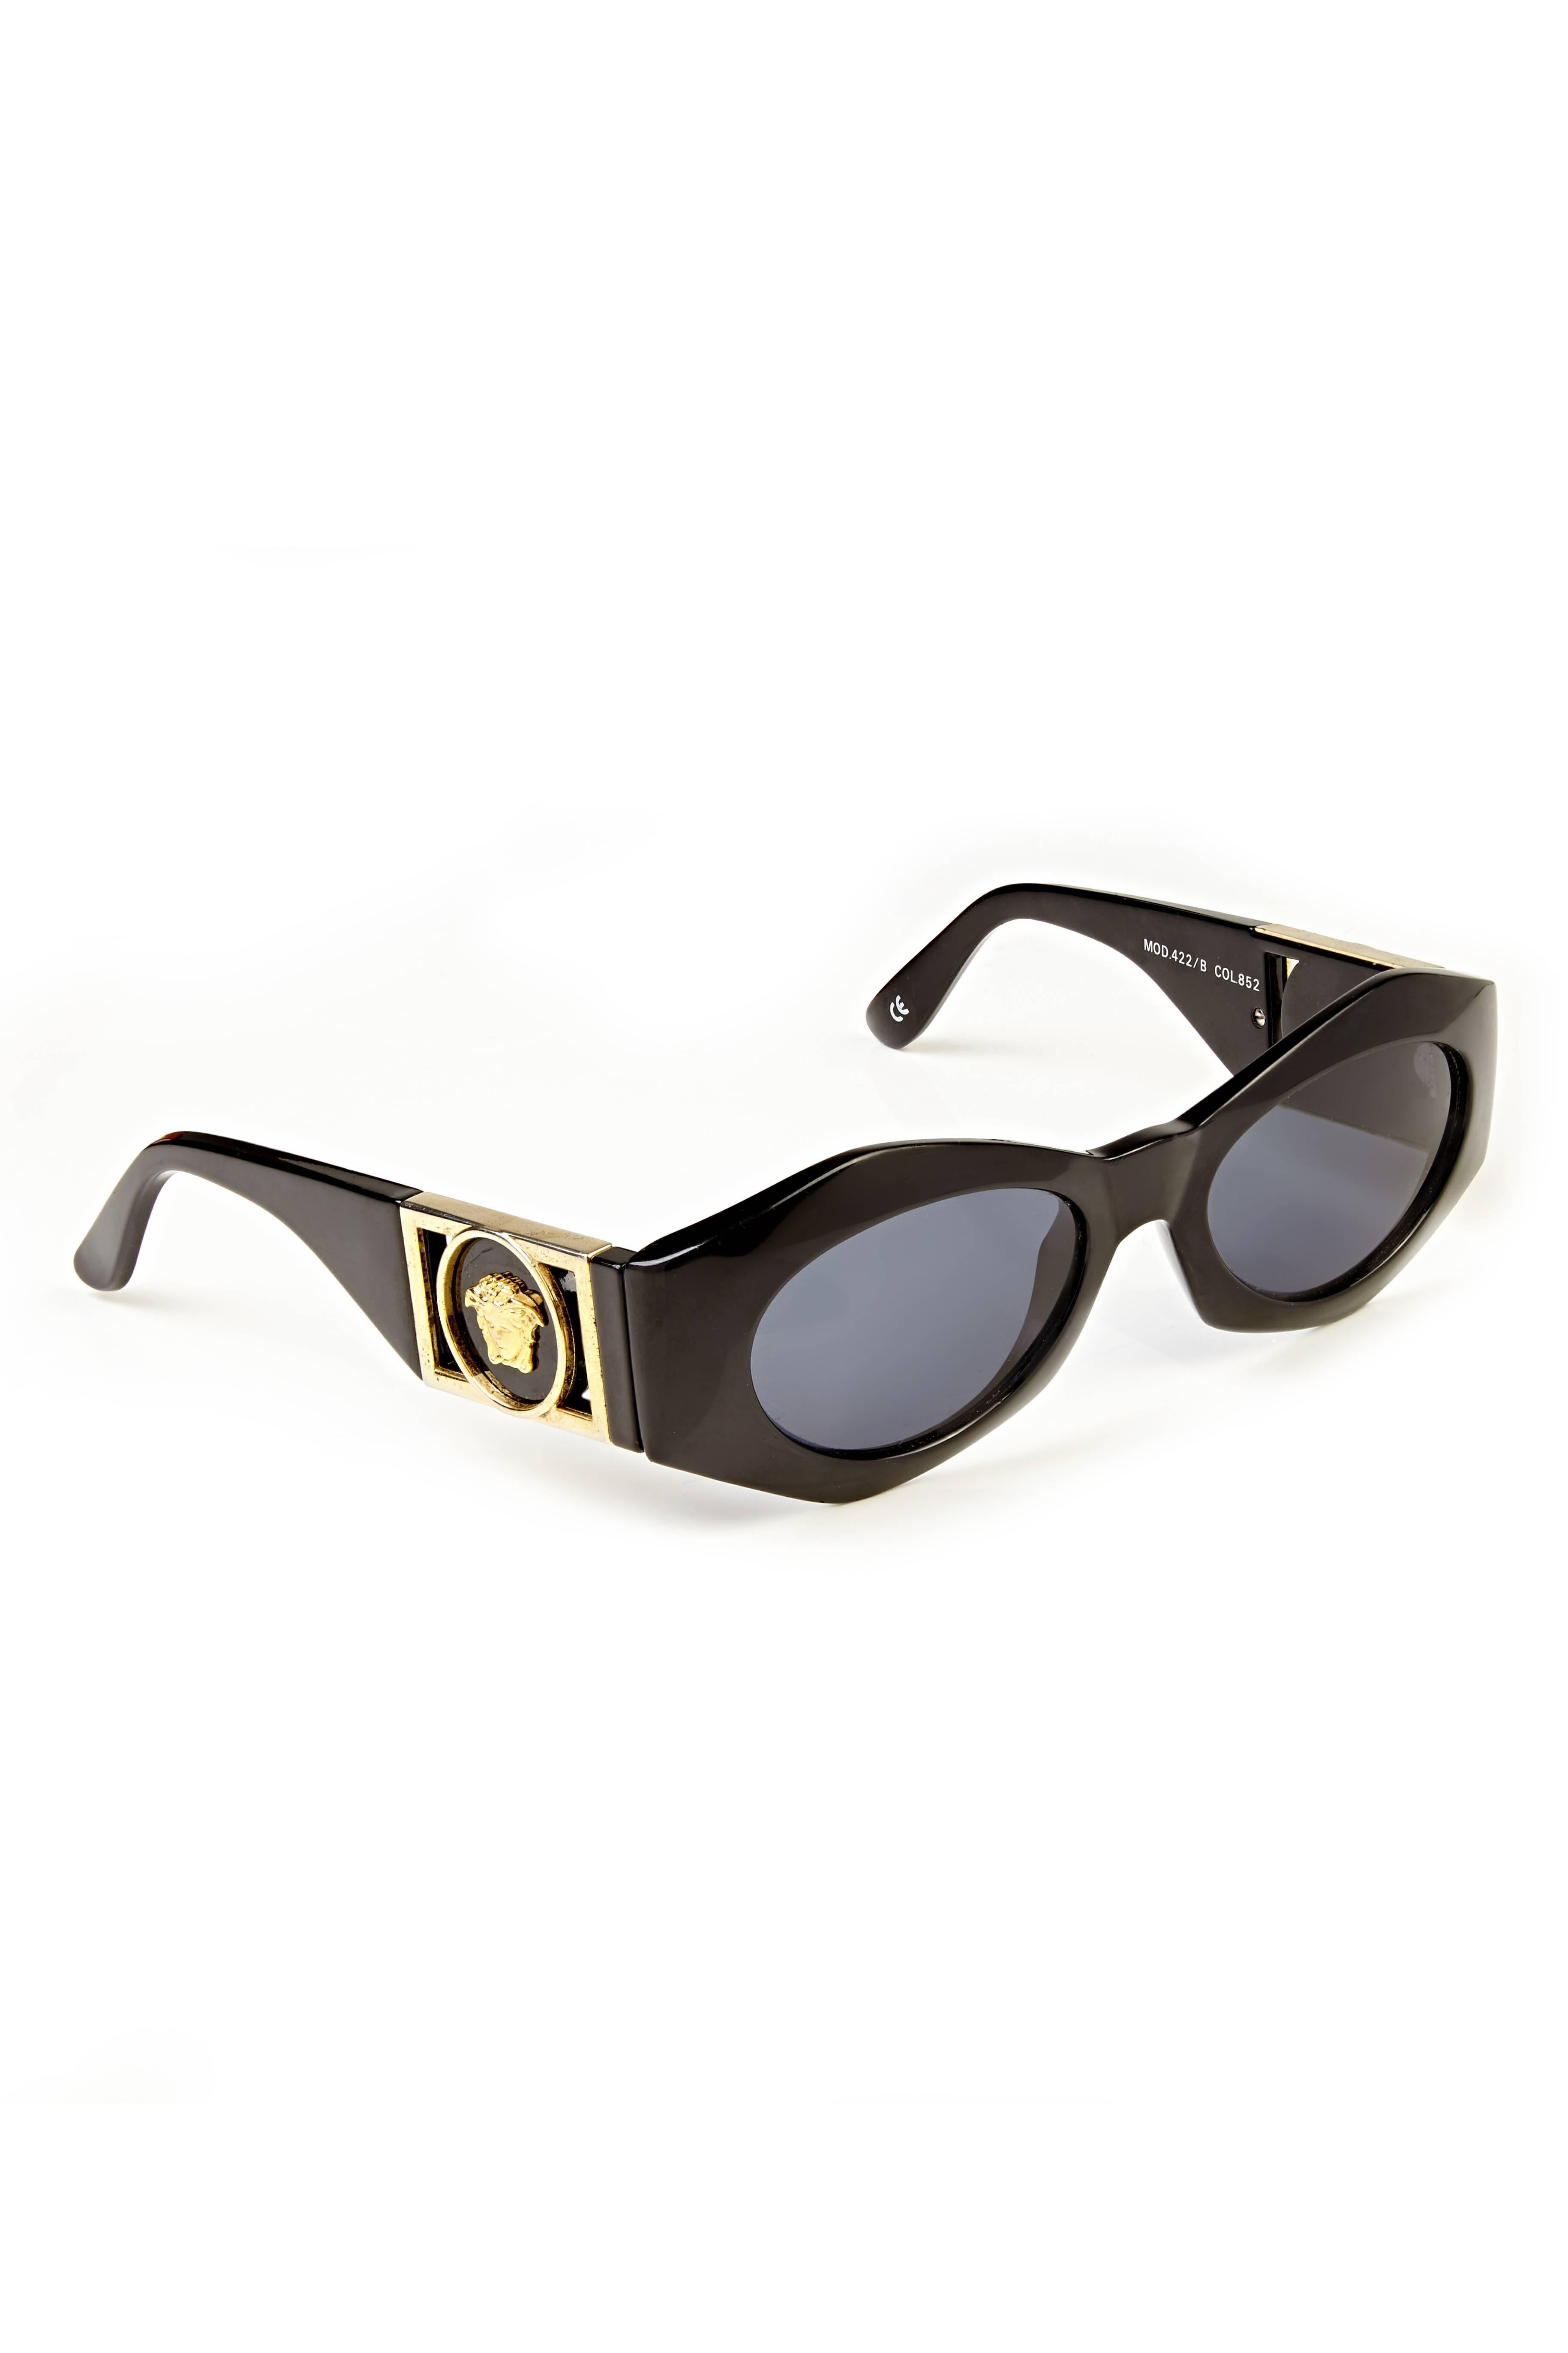 These stylish Black Versace sunglasses circa 1990s are in fabulous condition (like new) and are complete with the original leather casing. Emblazoned on each temple with the classic Versace motif in gold. The casing is a pocket style design with an